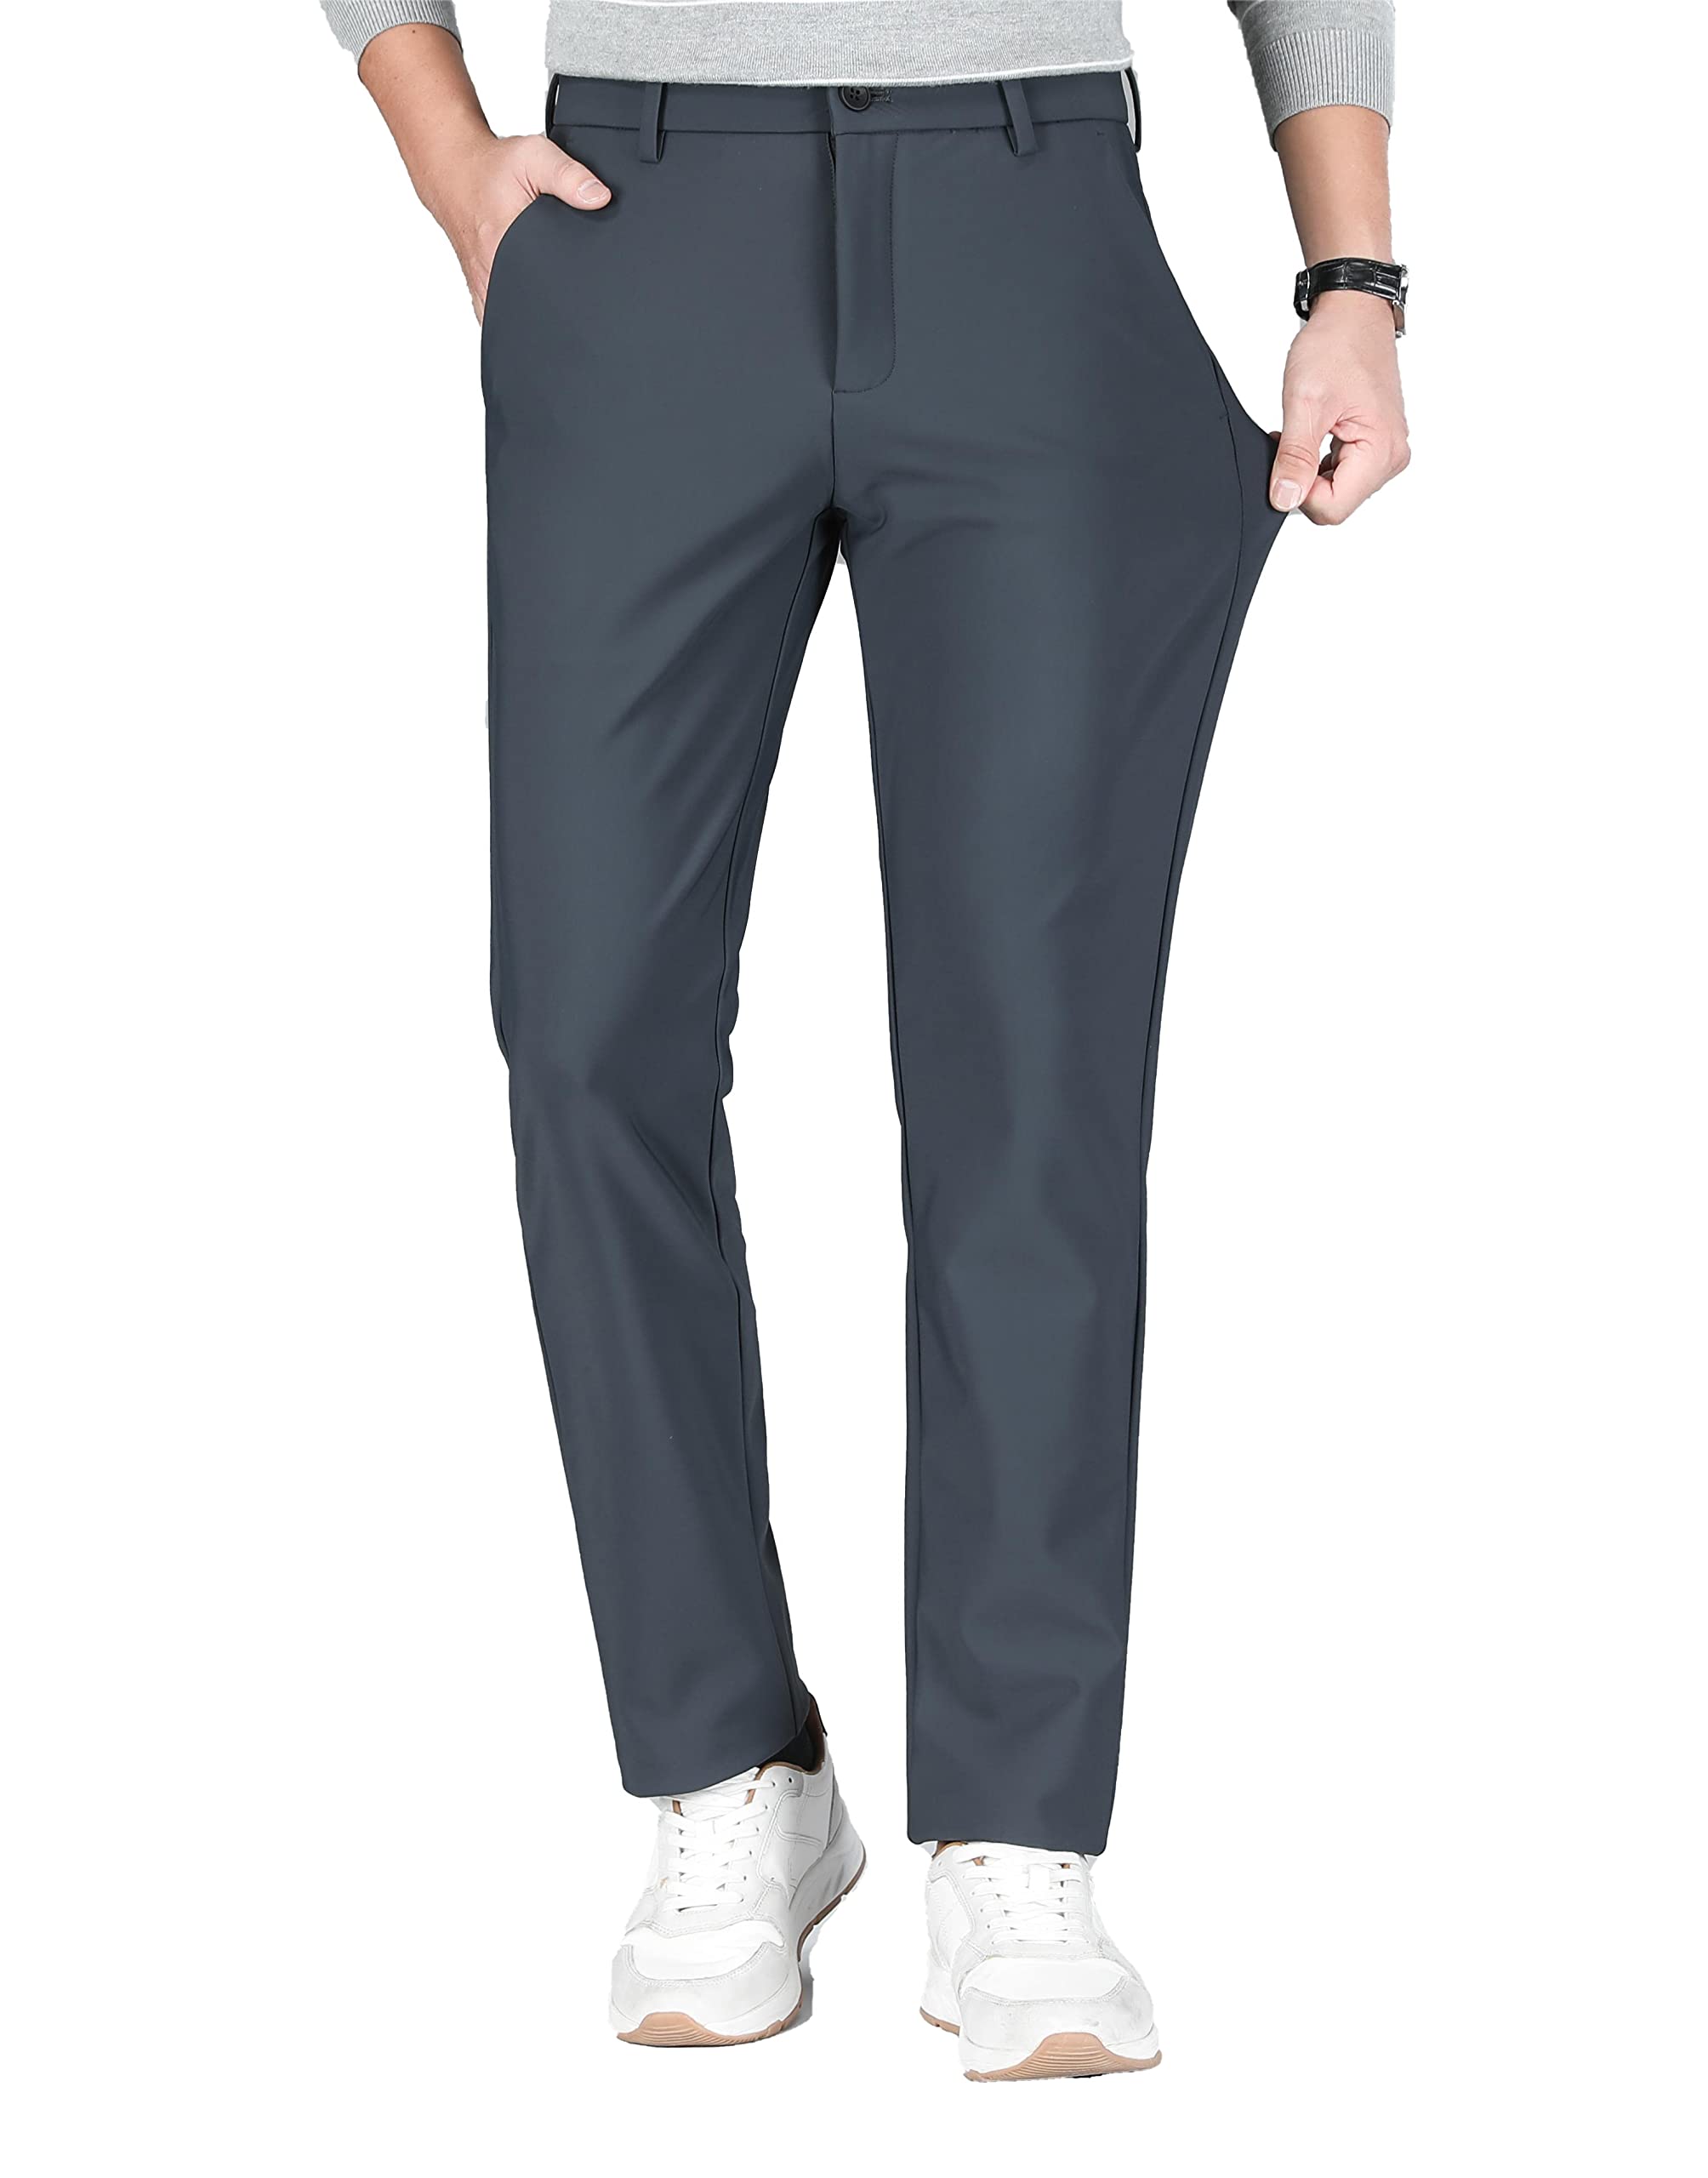 2021 British Style Mens Slim Fit Business Office Pants Men Simple & Formal, Ankle  Length, Available From Yansuhuan, $42.77 | DHgate.Com